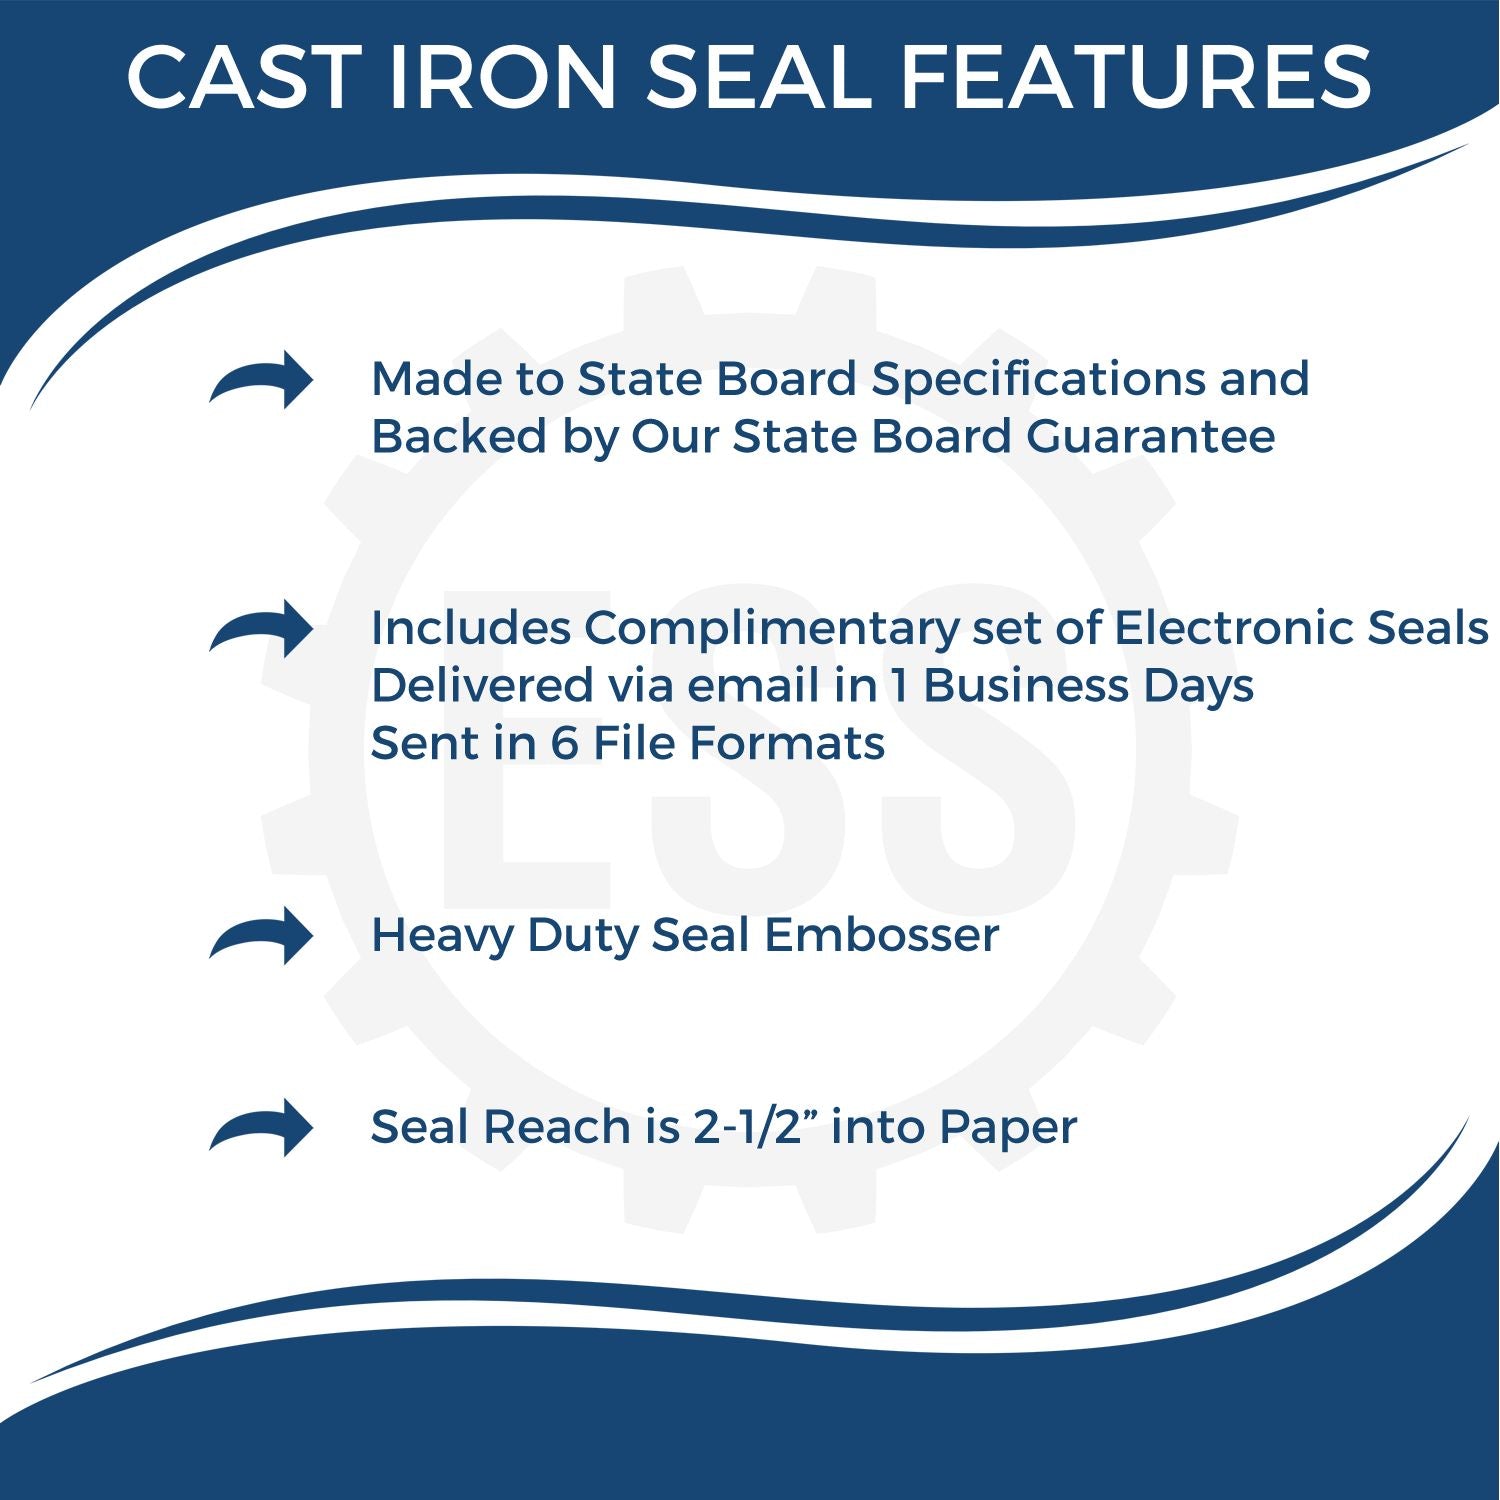 The main image for the Heavy Duty Cast Iron California Engineer Seal Embosser depicting a sample of the imprint and electronic files